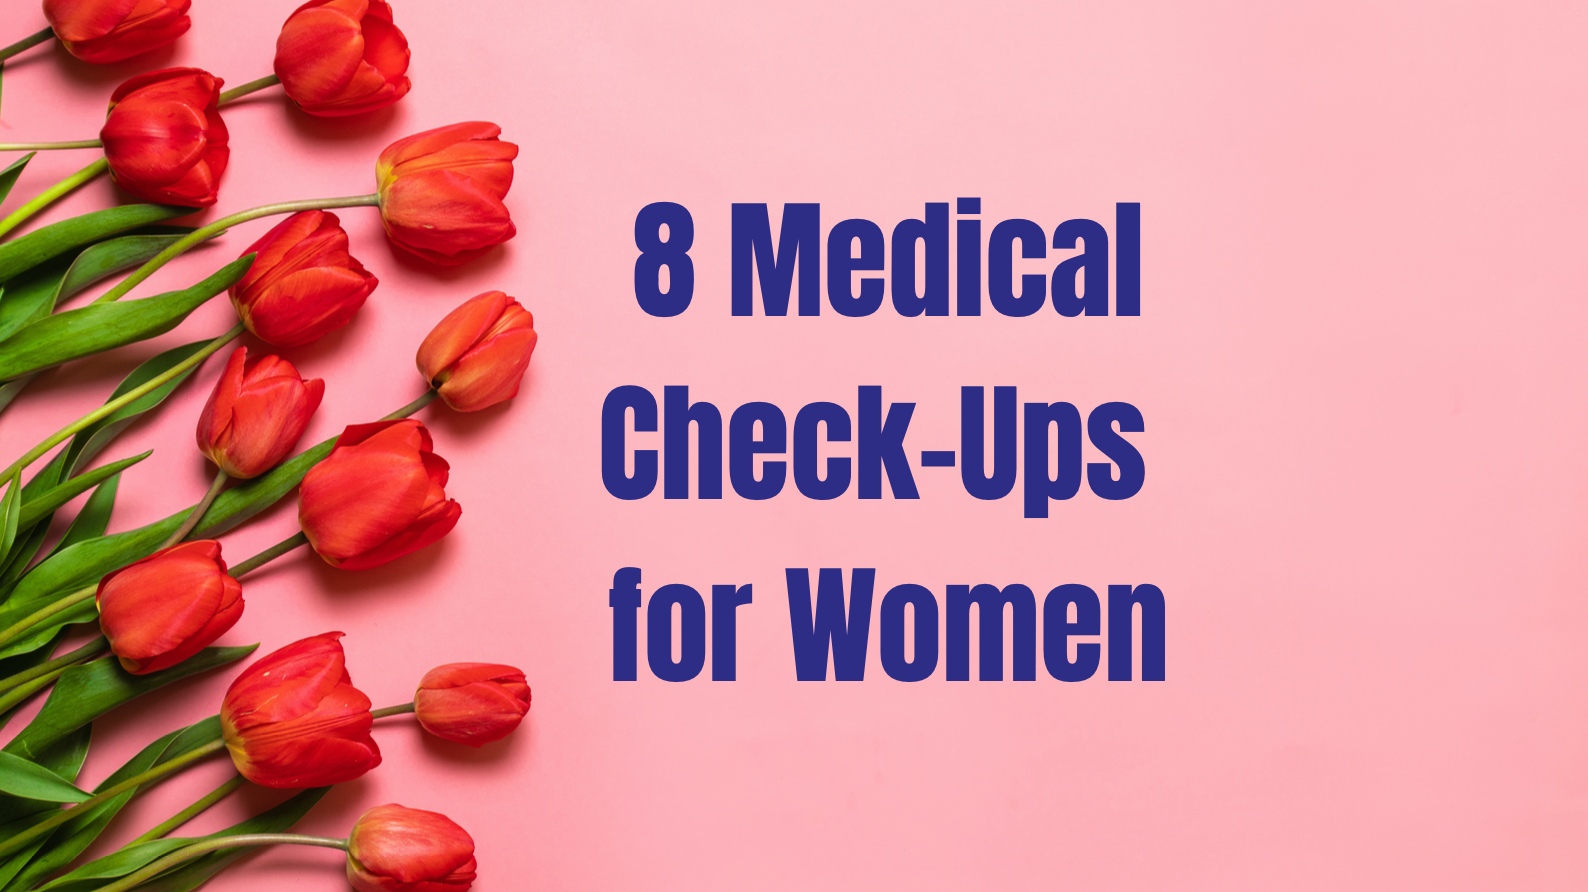 8 check-ups for women